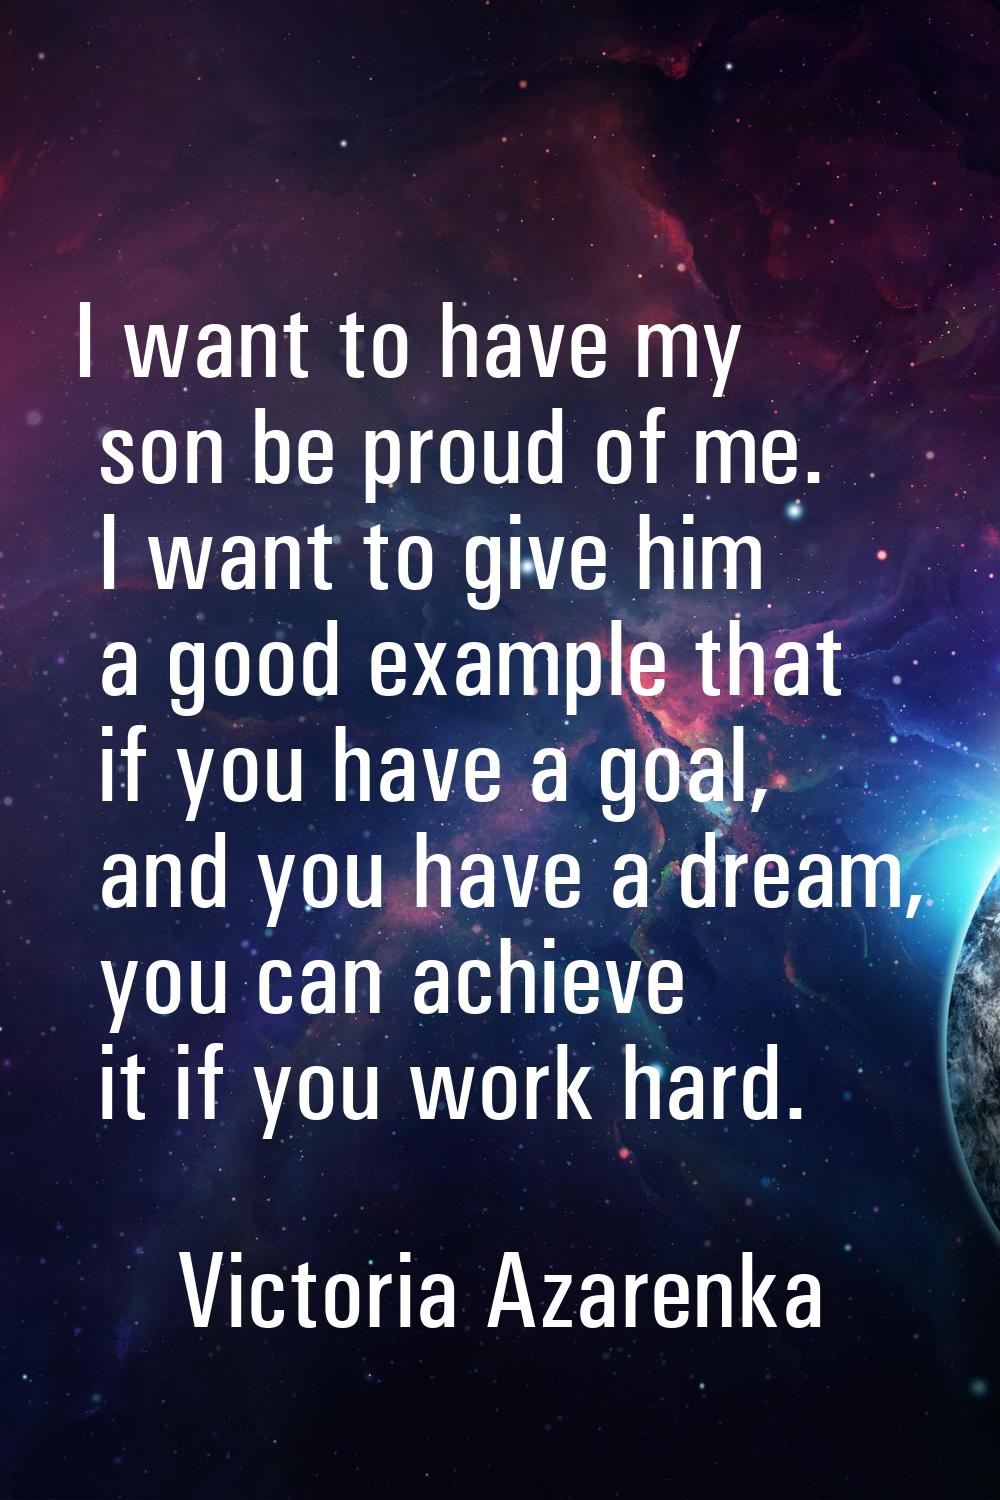 I want to have my son be proud of me. I want to give him a good example that if you have a goal, an